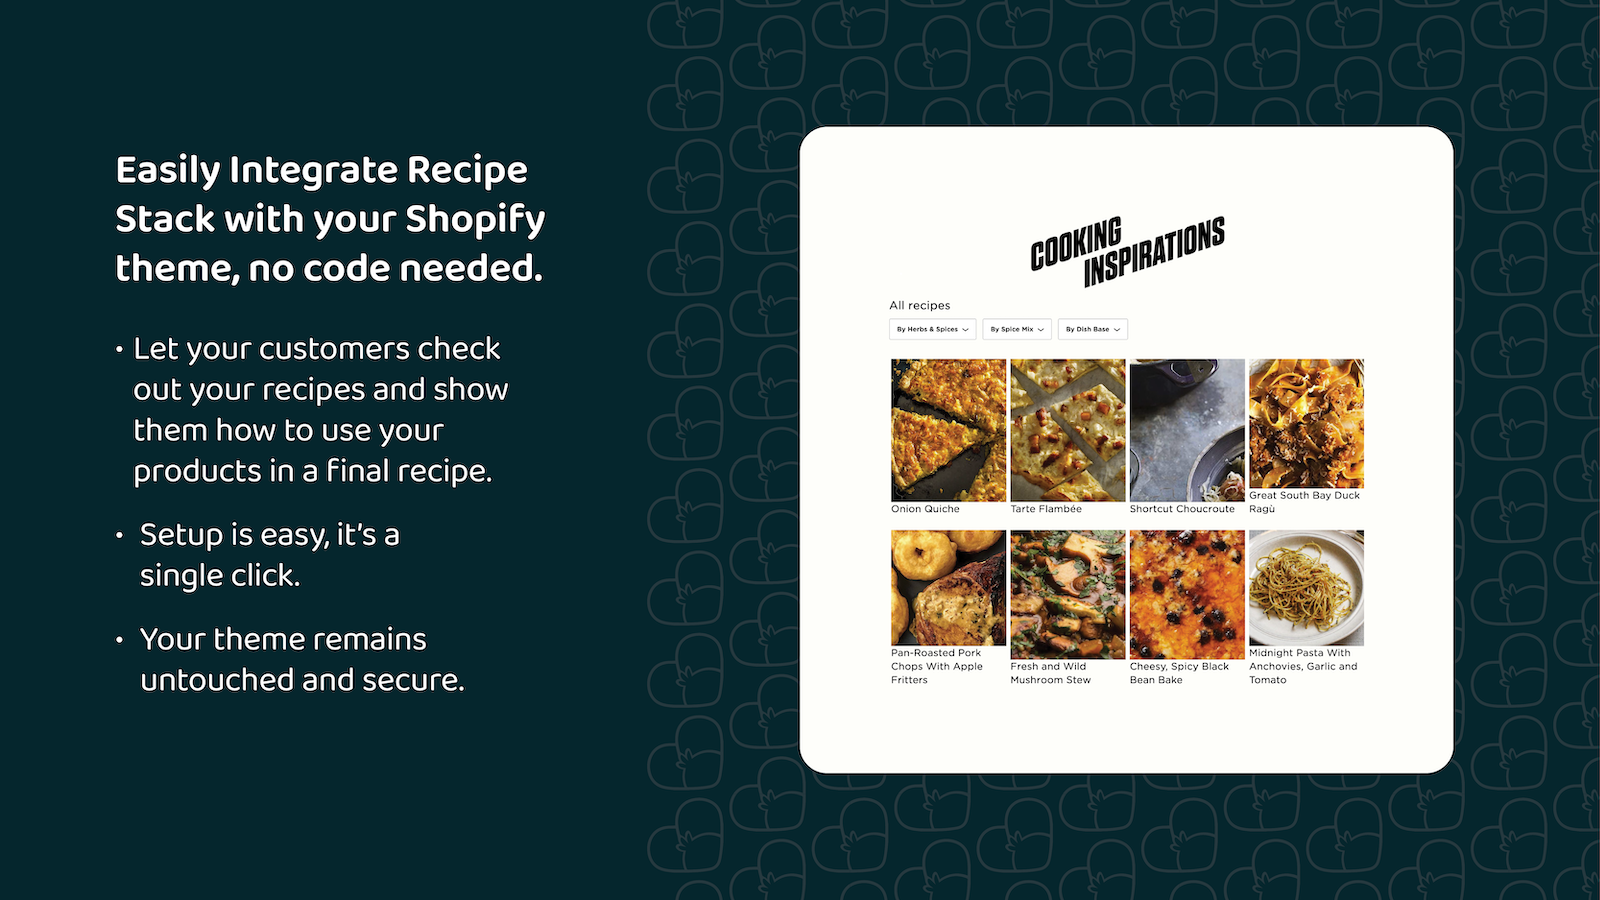 Use recipes and allow your customers to filter them